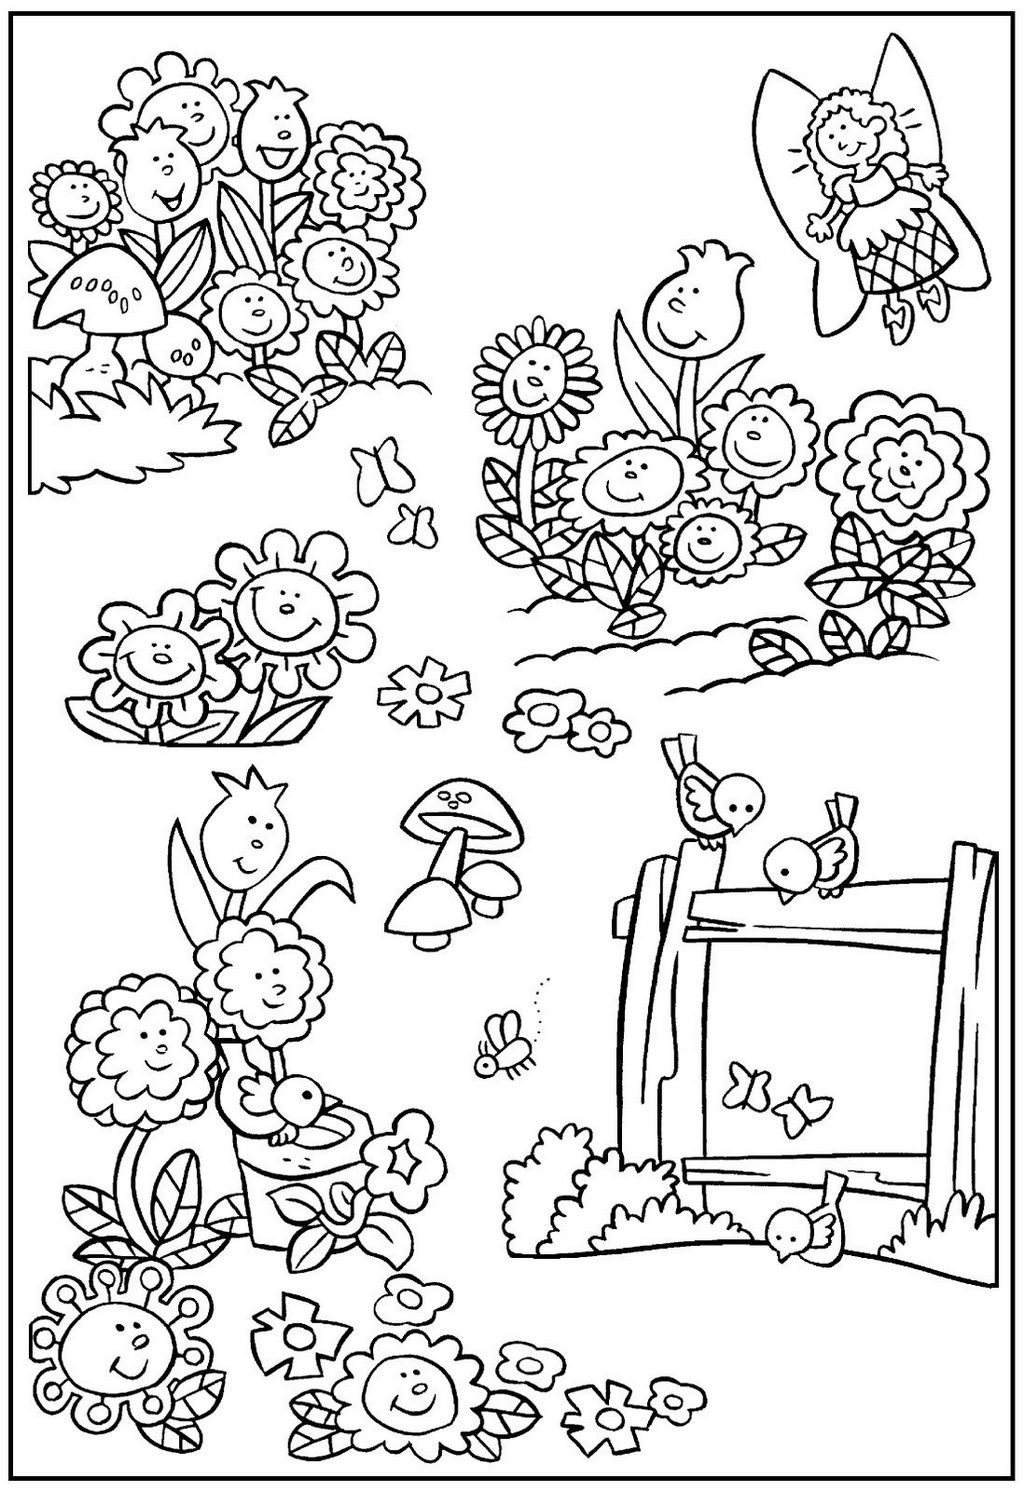 colorful and beautiful flower garden coloring page